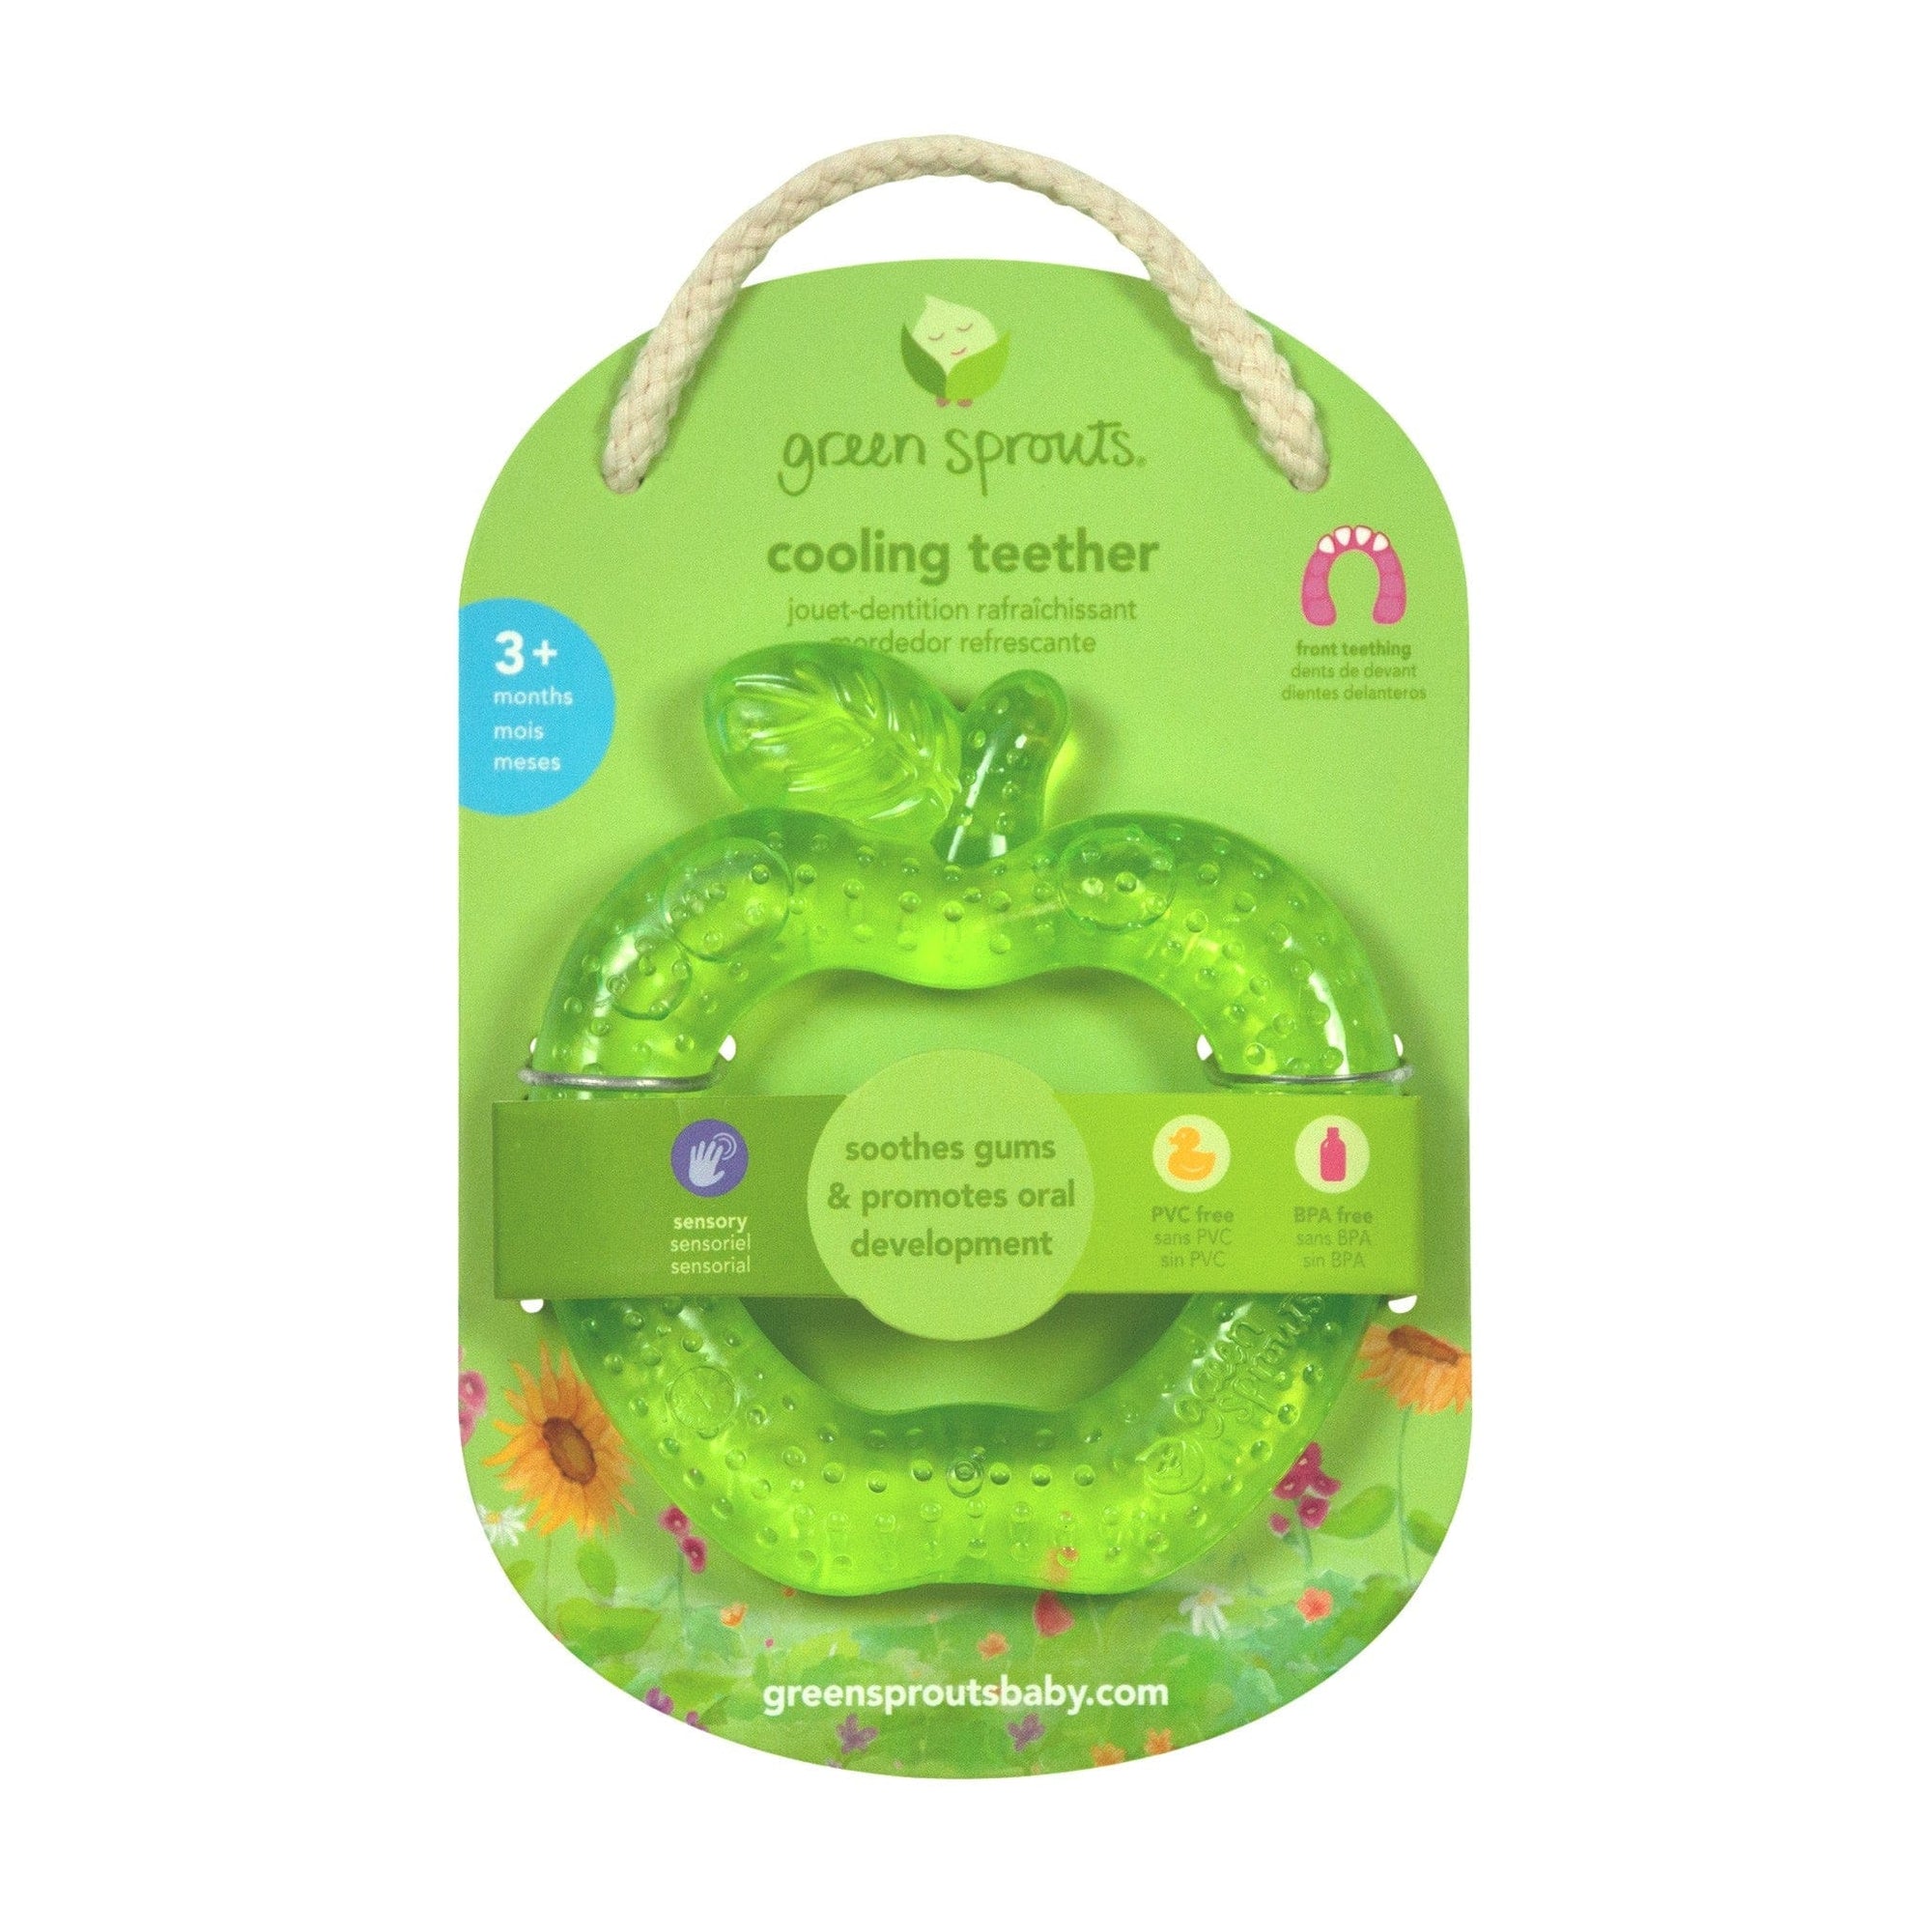 Green Sprouts teether Green Sprouts Cooling Teether - Apple